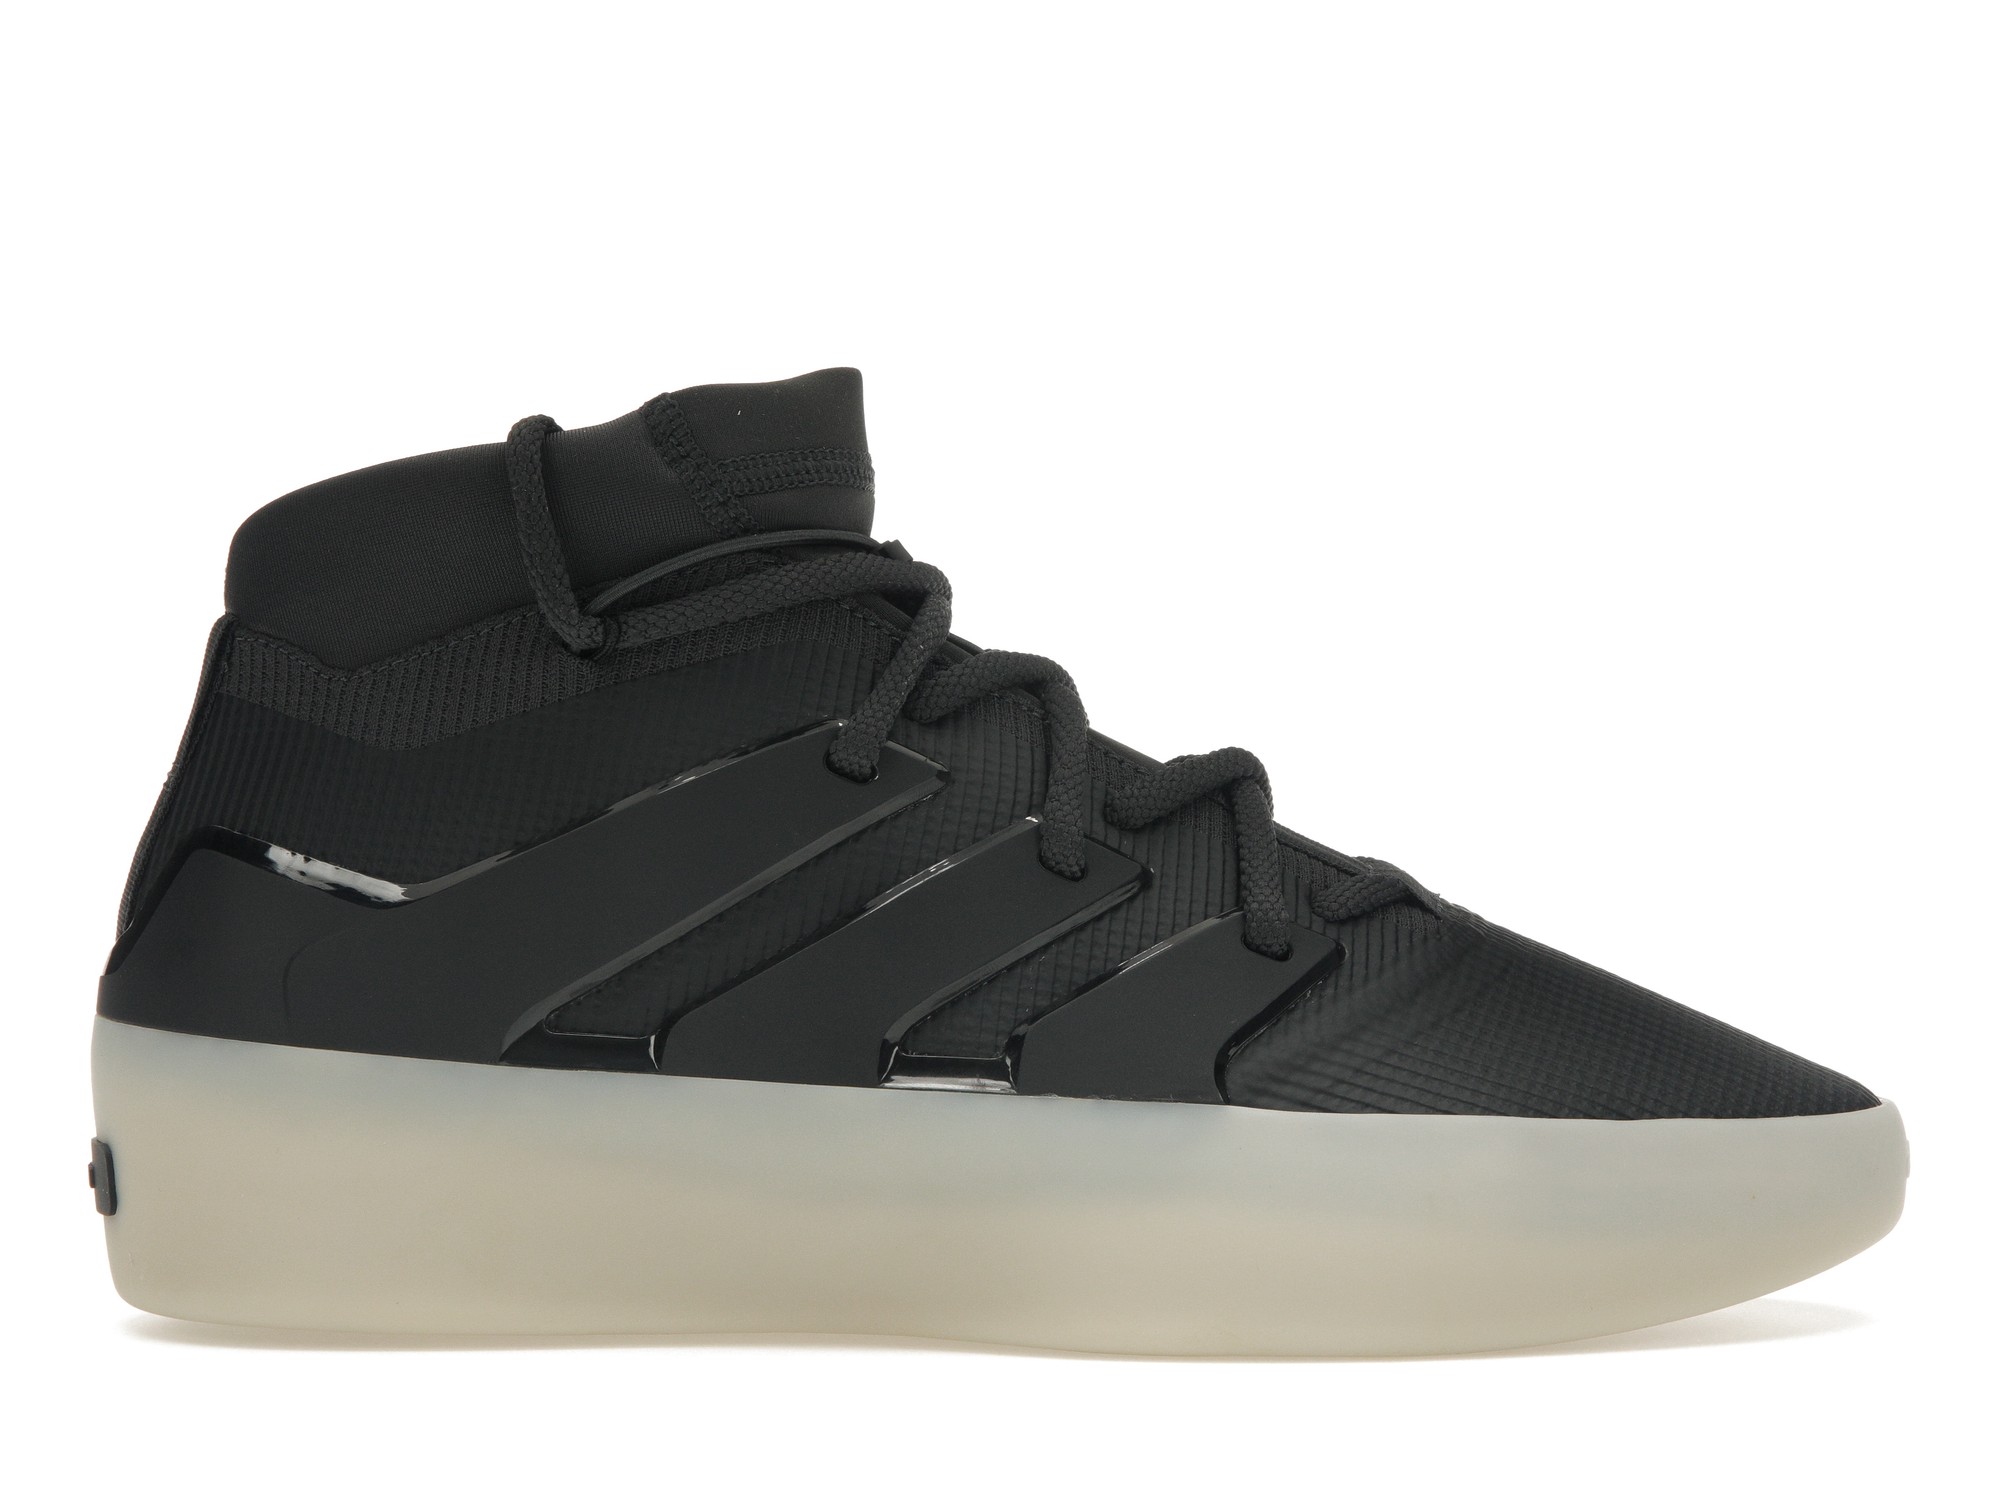 Buy Fear of God Military Sneaker 'Army Green' - FGTP MSNU AG16 | GOAT